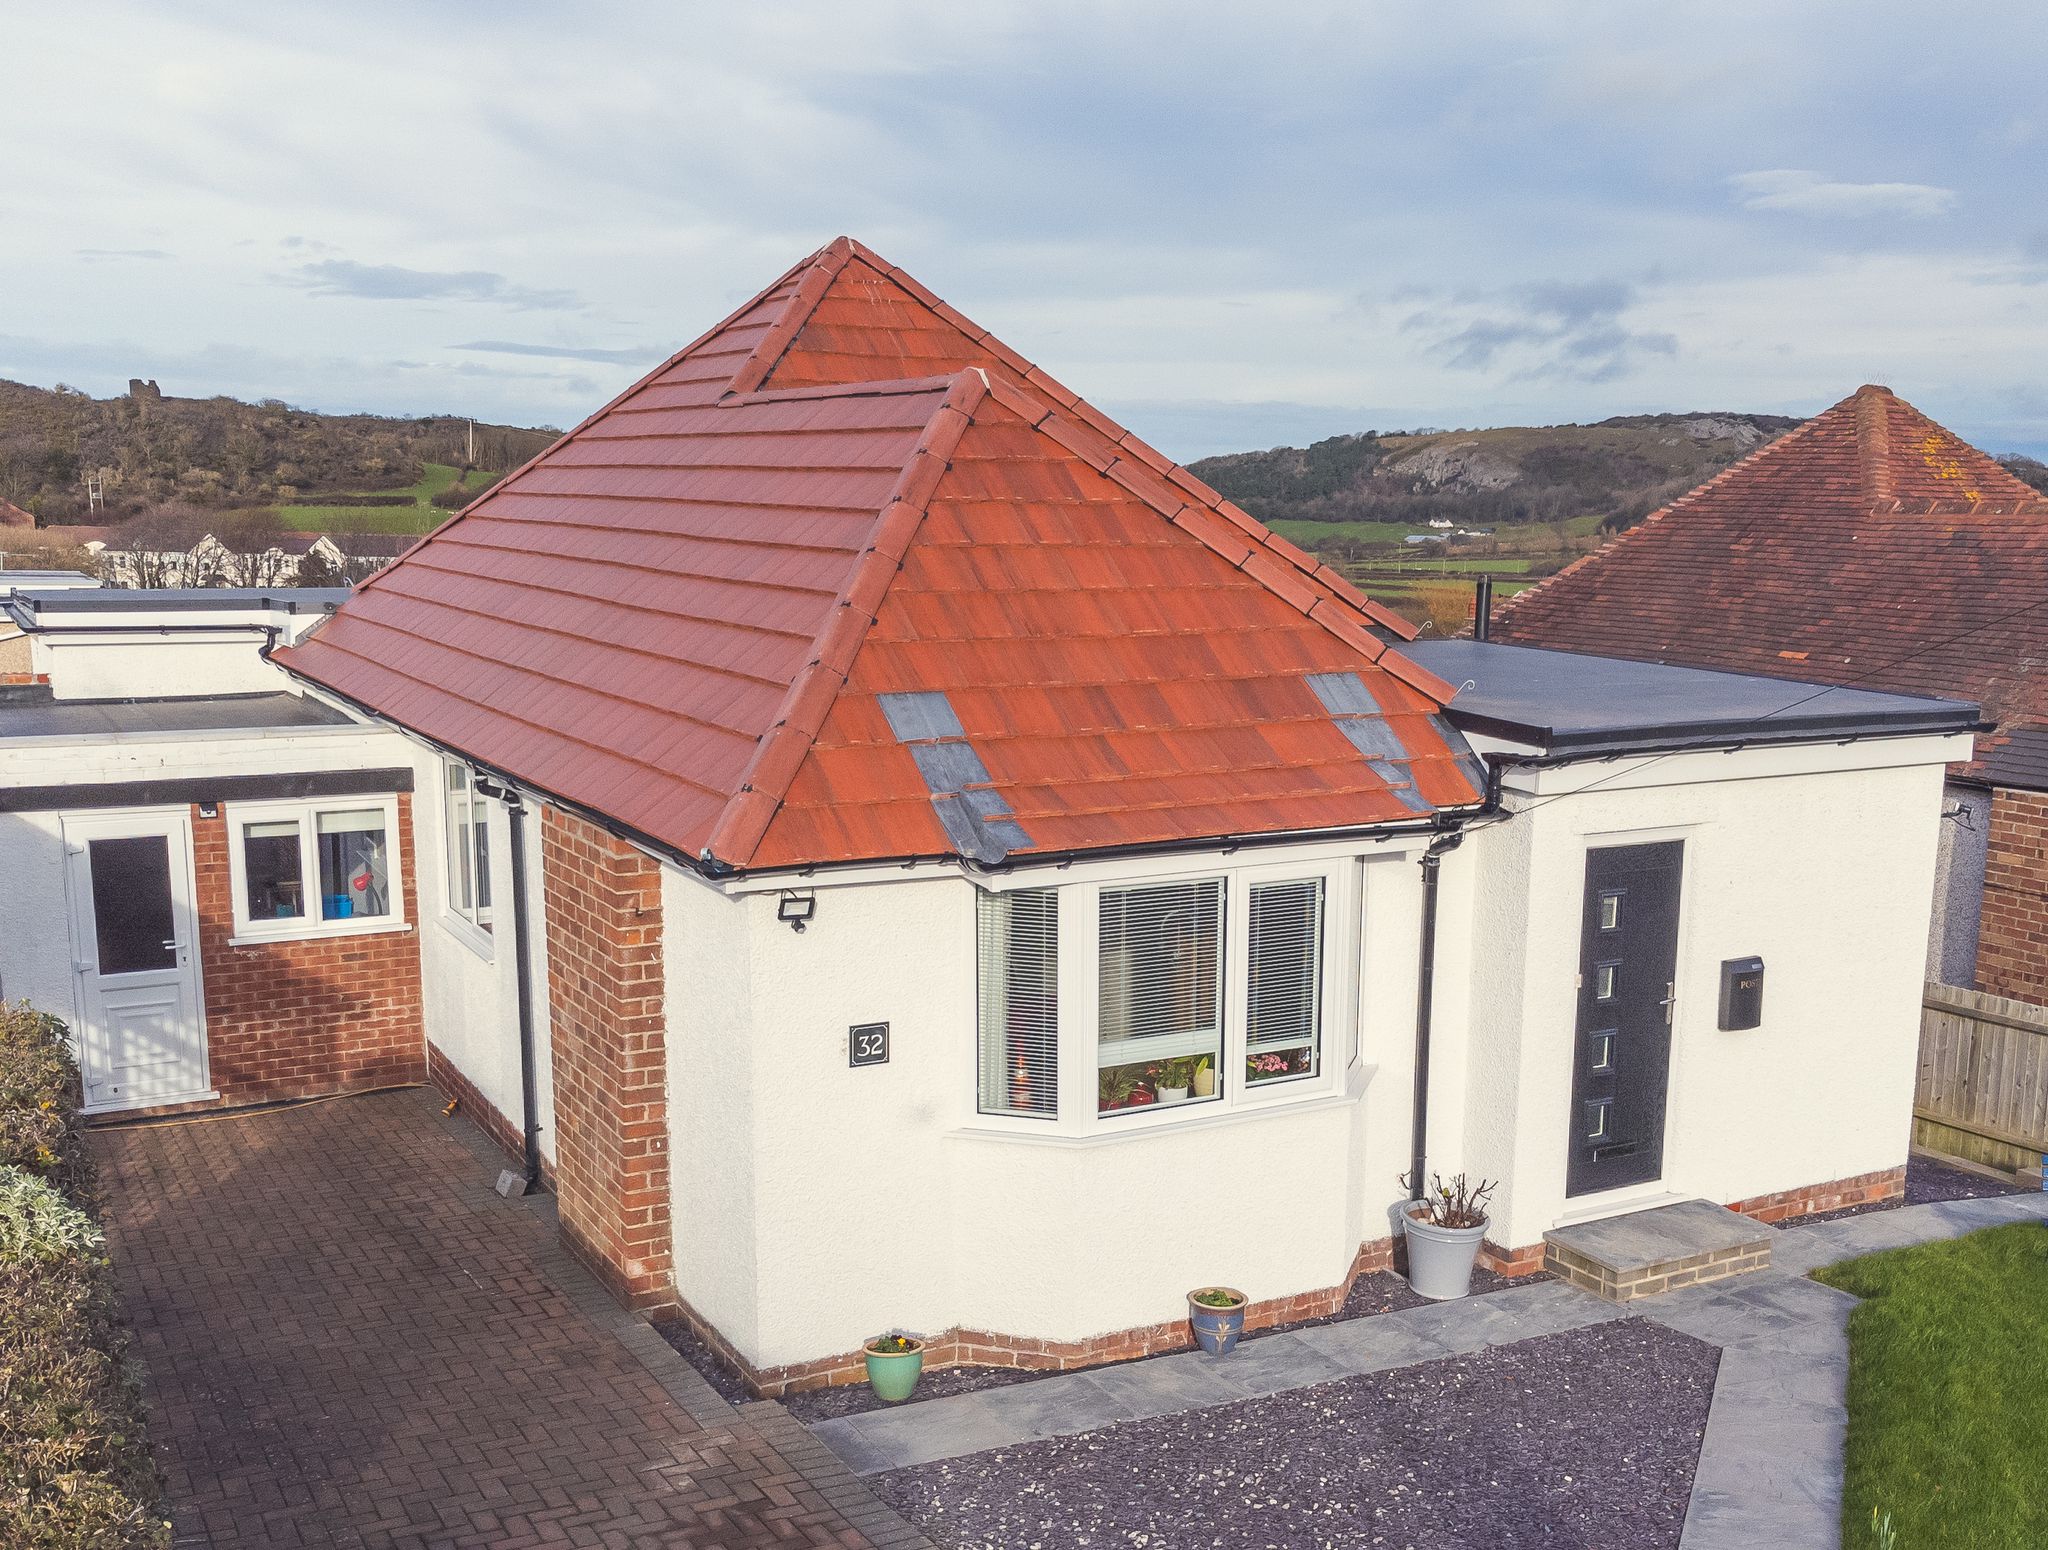 Tile Roof Contractors Gallt-y-foel, LL55 - DD Roofing